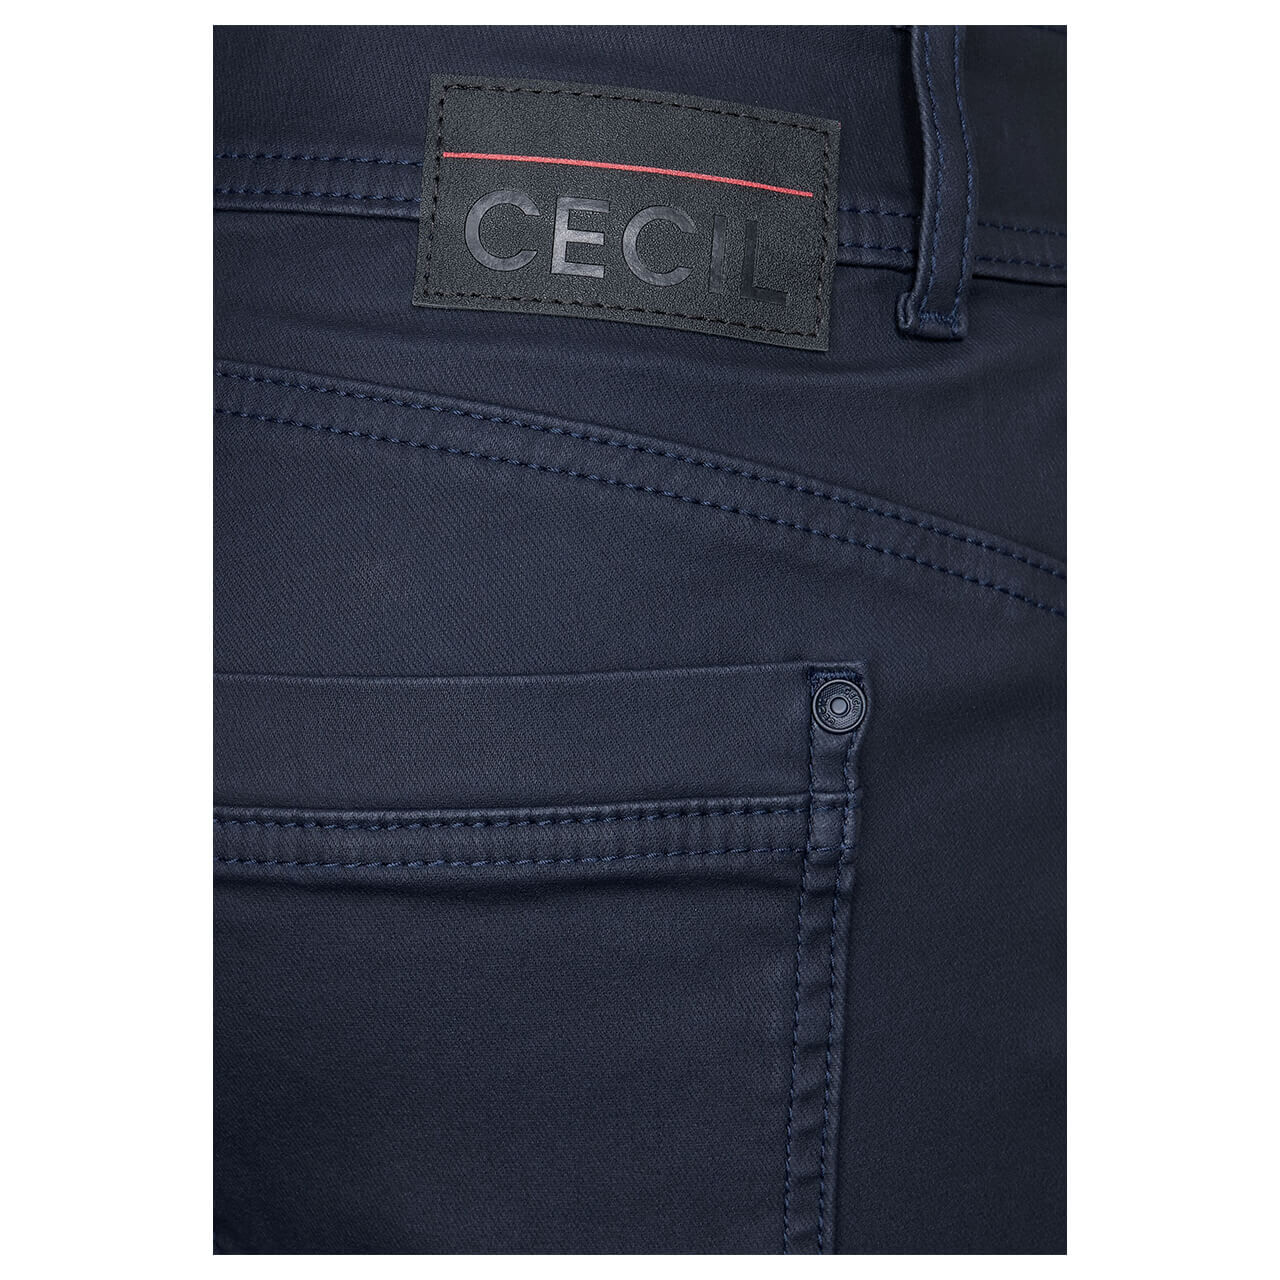 Cecil Toronto Jeans night sky blue coated 